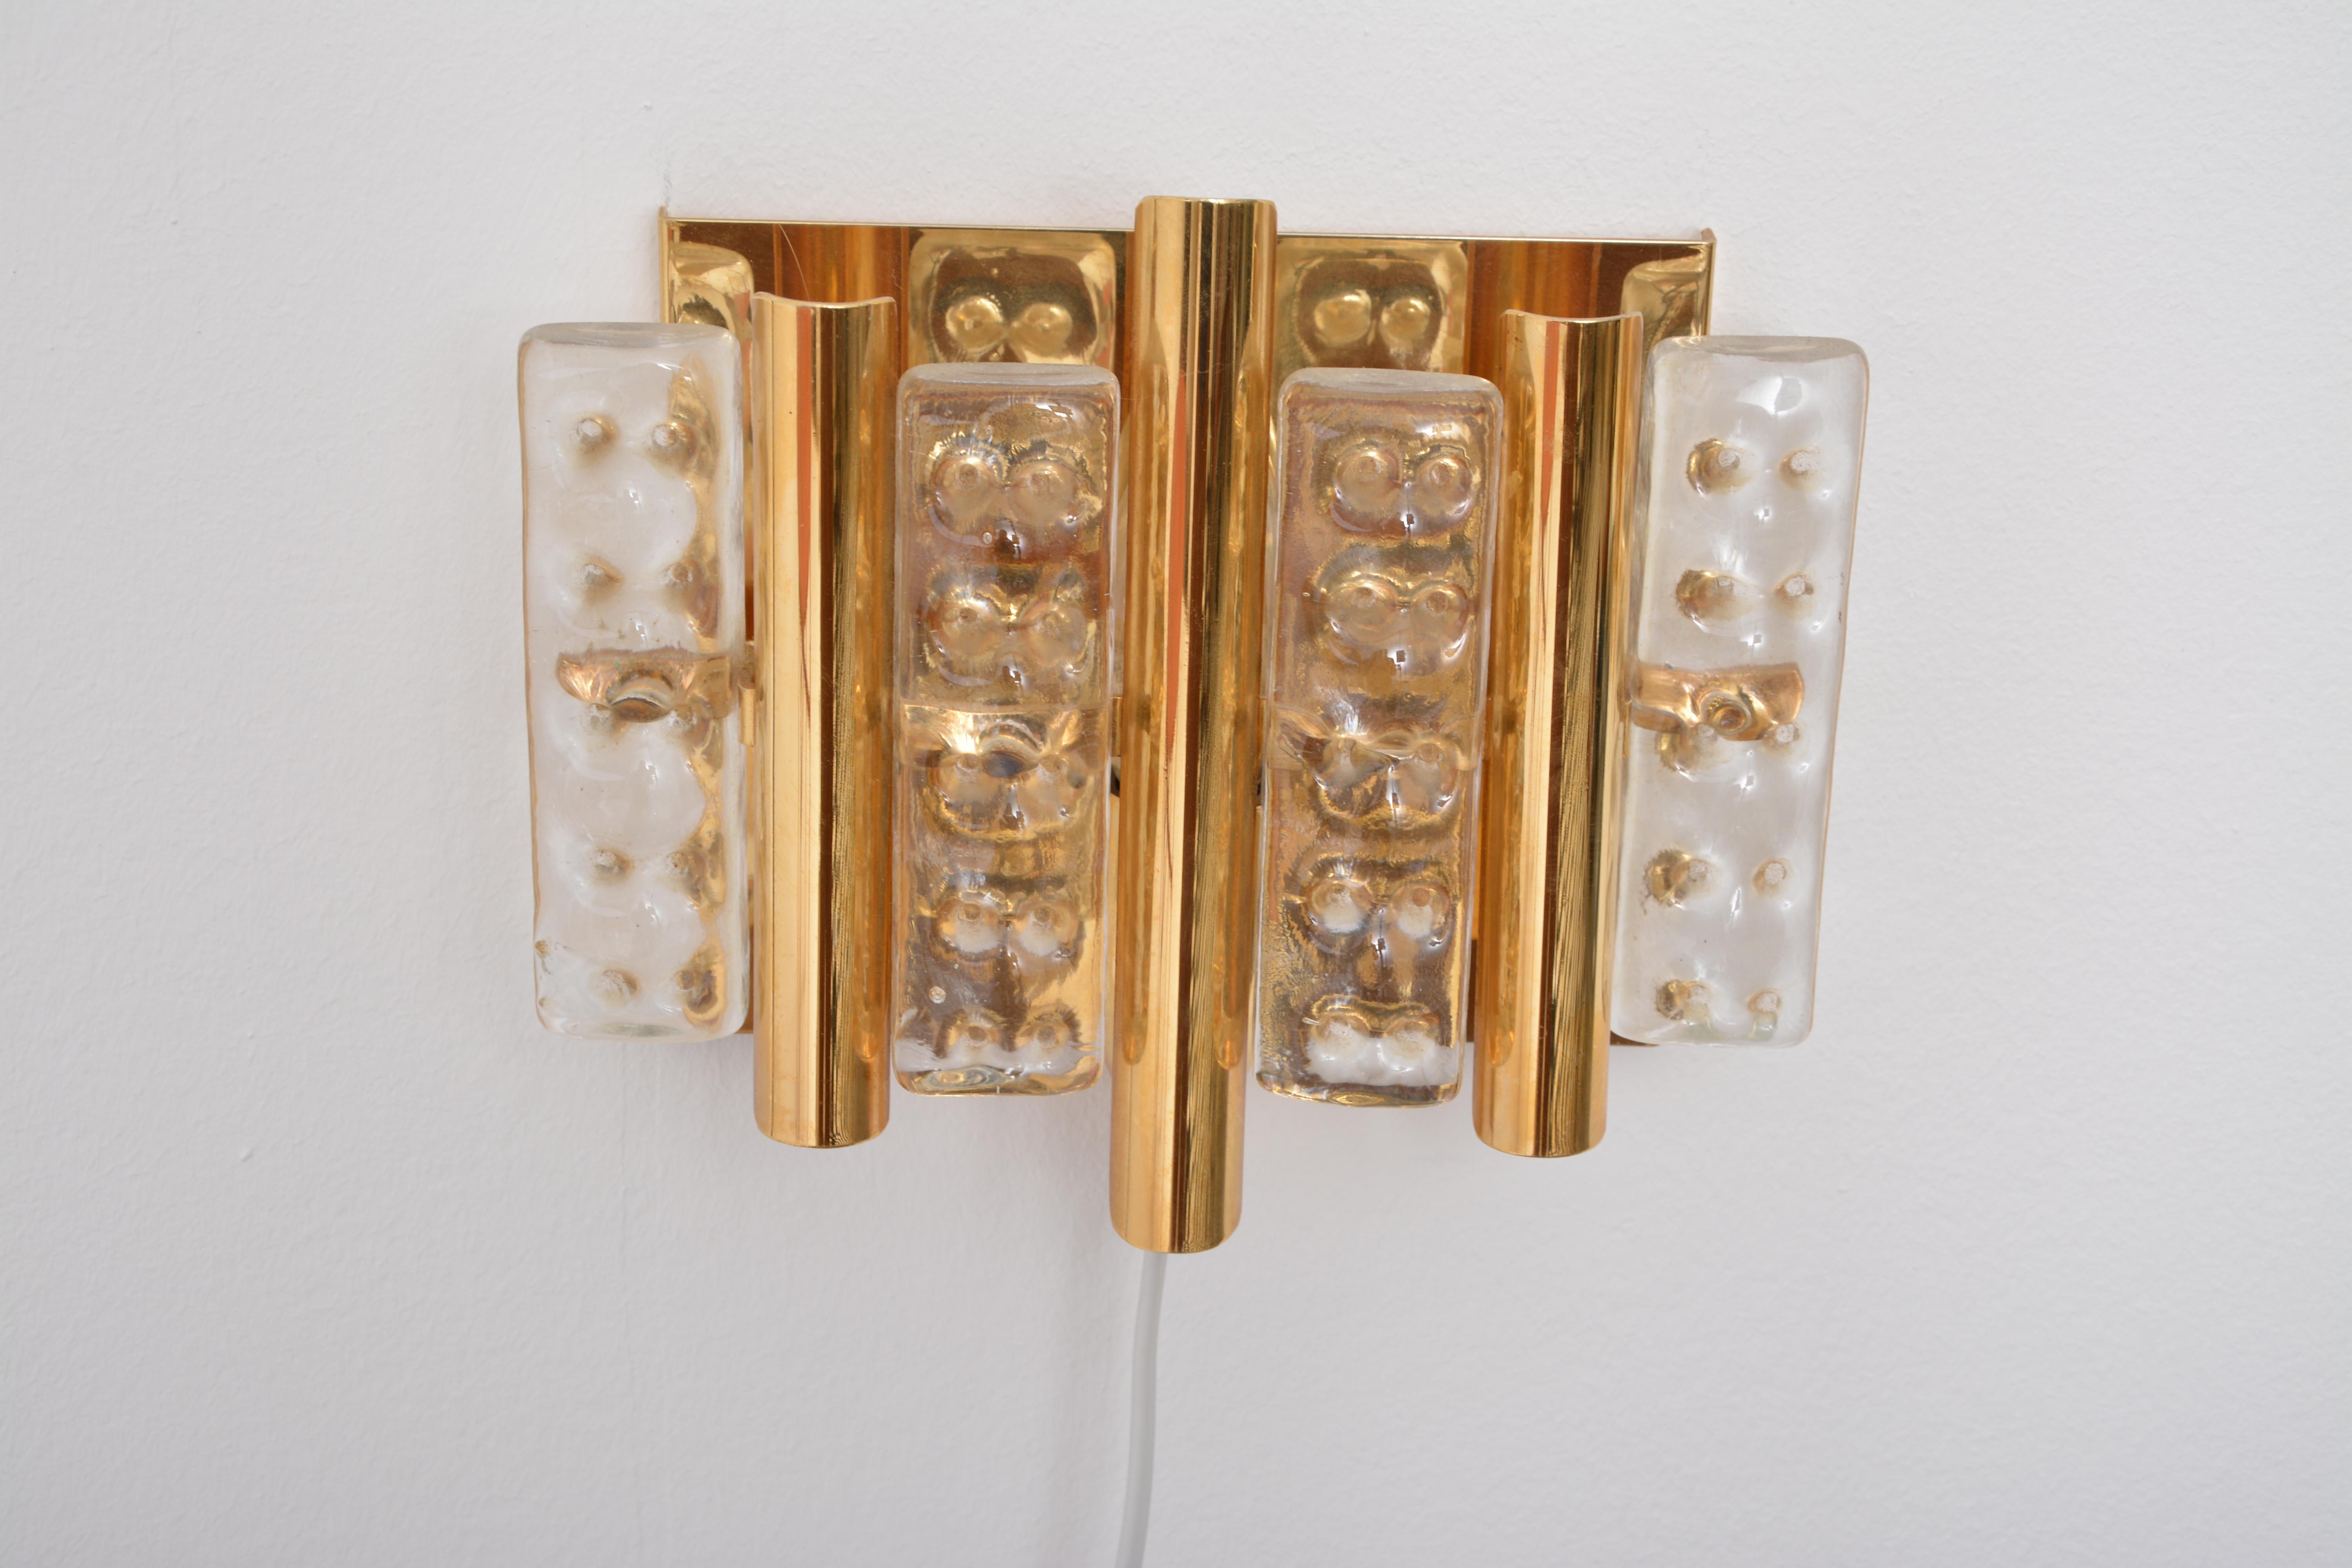 Set of two Brass and Glass Mid-Century Modern wall lamps by Carl Fagerlund for Lyfa and Orrefors

This set of two wall lamps was designed by Carl Fagerlund and produced in the 1960s by Lyfa.
The lamps are made of brass and glass.